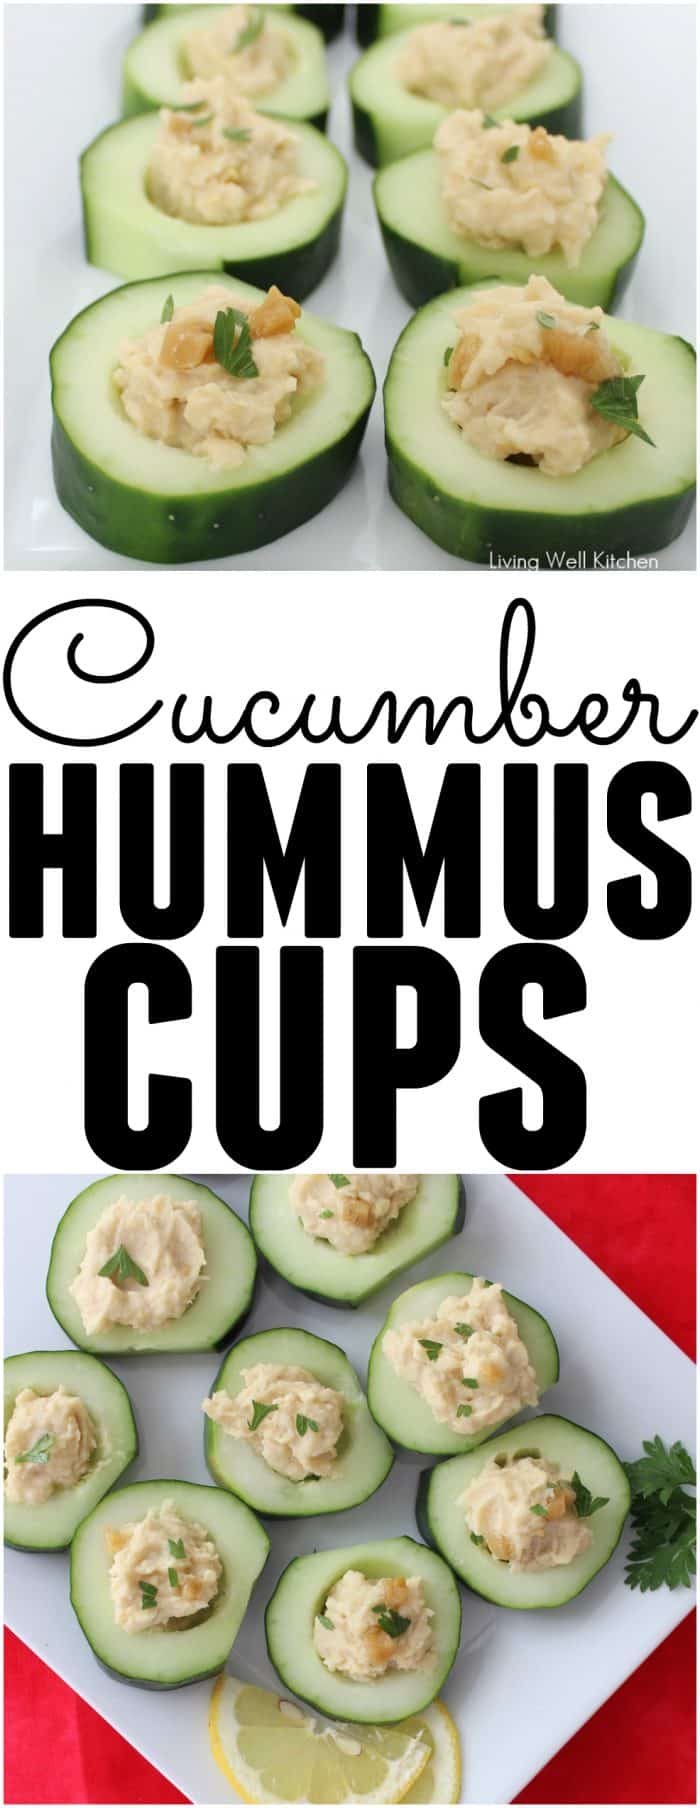 Refreshing and delicious, these Cucumber Hummus Cups are the perfect summer snack or appetizer! Gluten free, vegan, and easy to make. These are great for entertaining or snacking